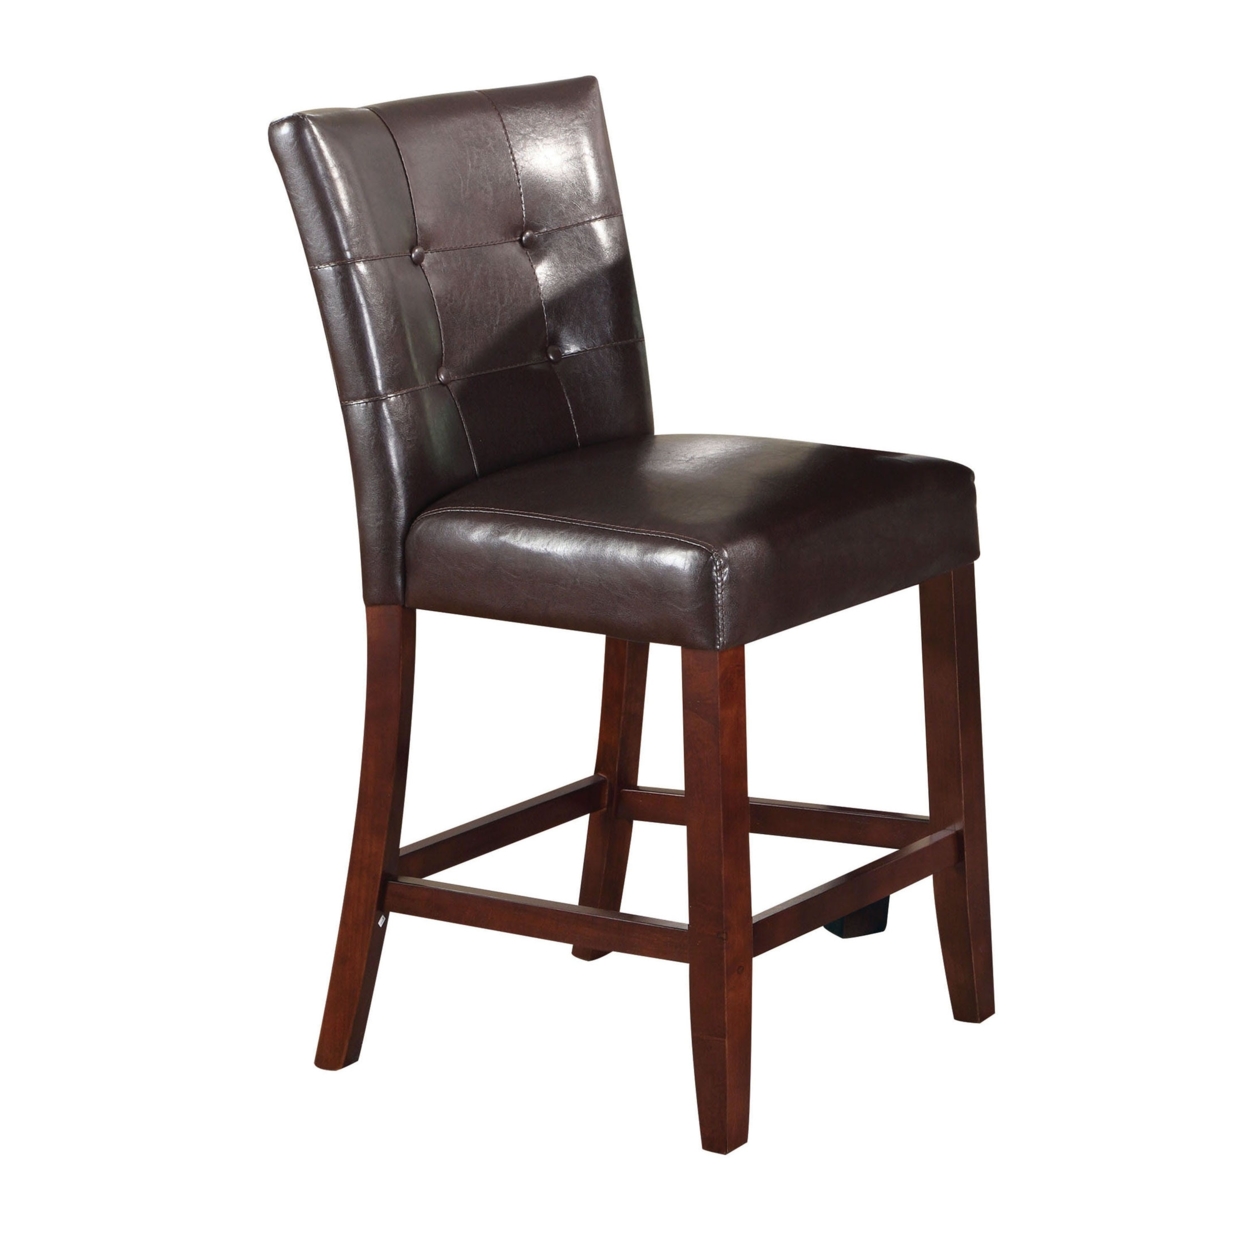 Leather Upholstered Wooden Counter Height Chair, Brown, Set Of 2- Saltoro Sherpi